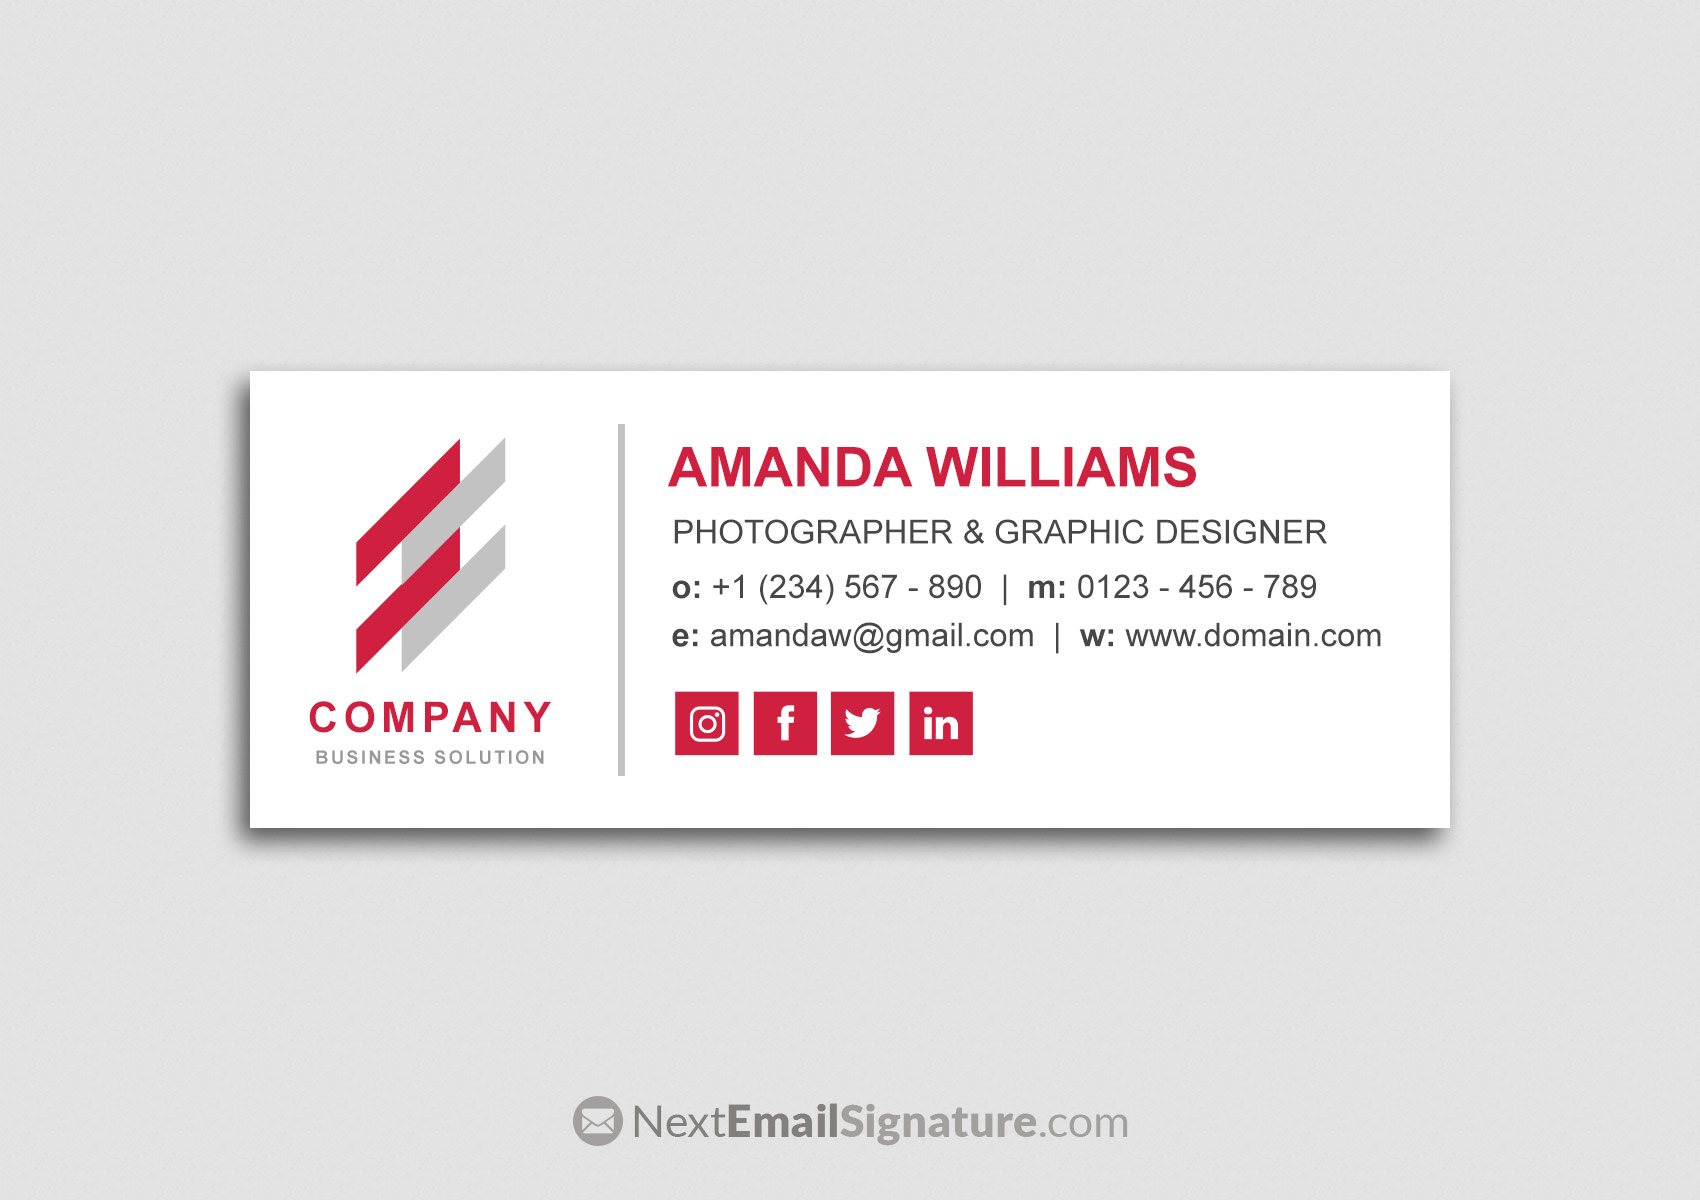 Email signature with logo